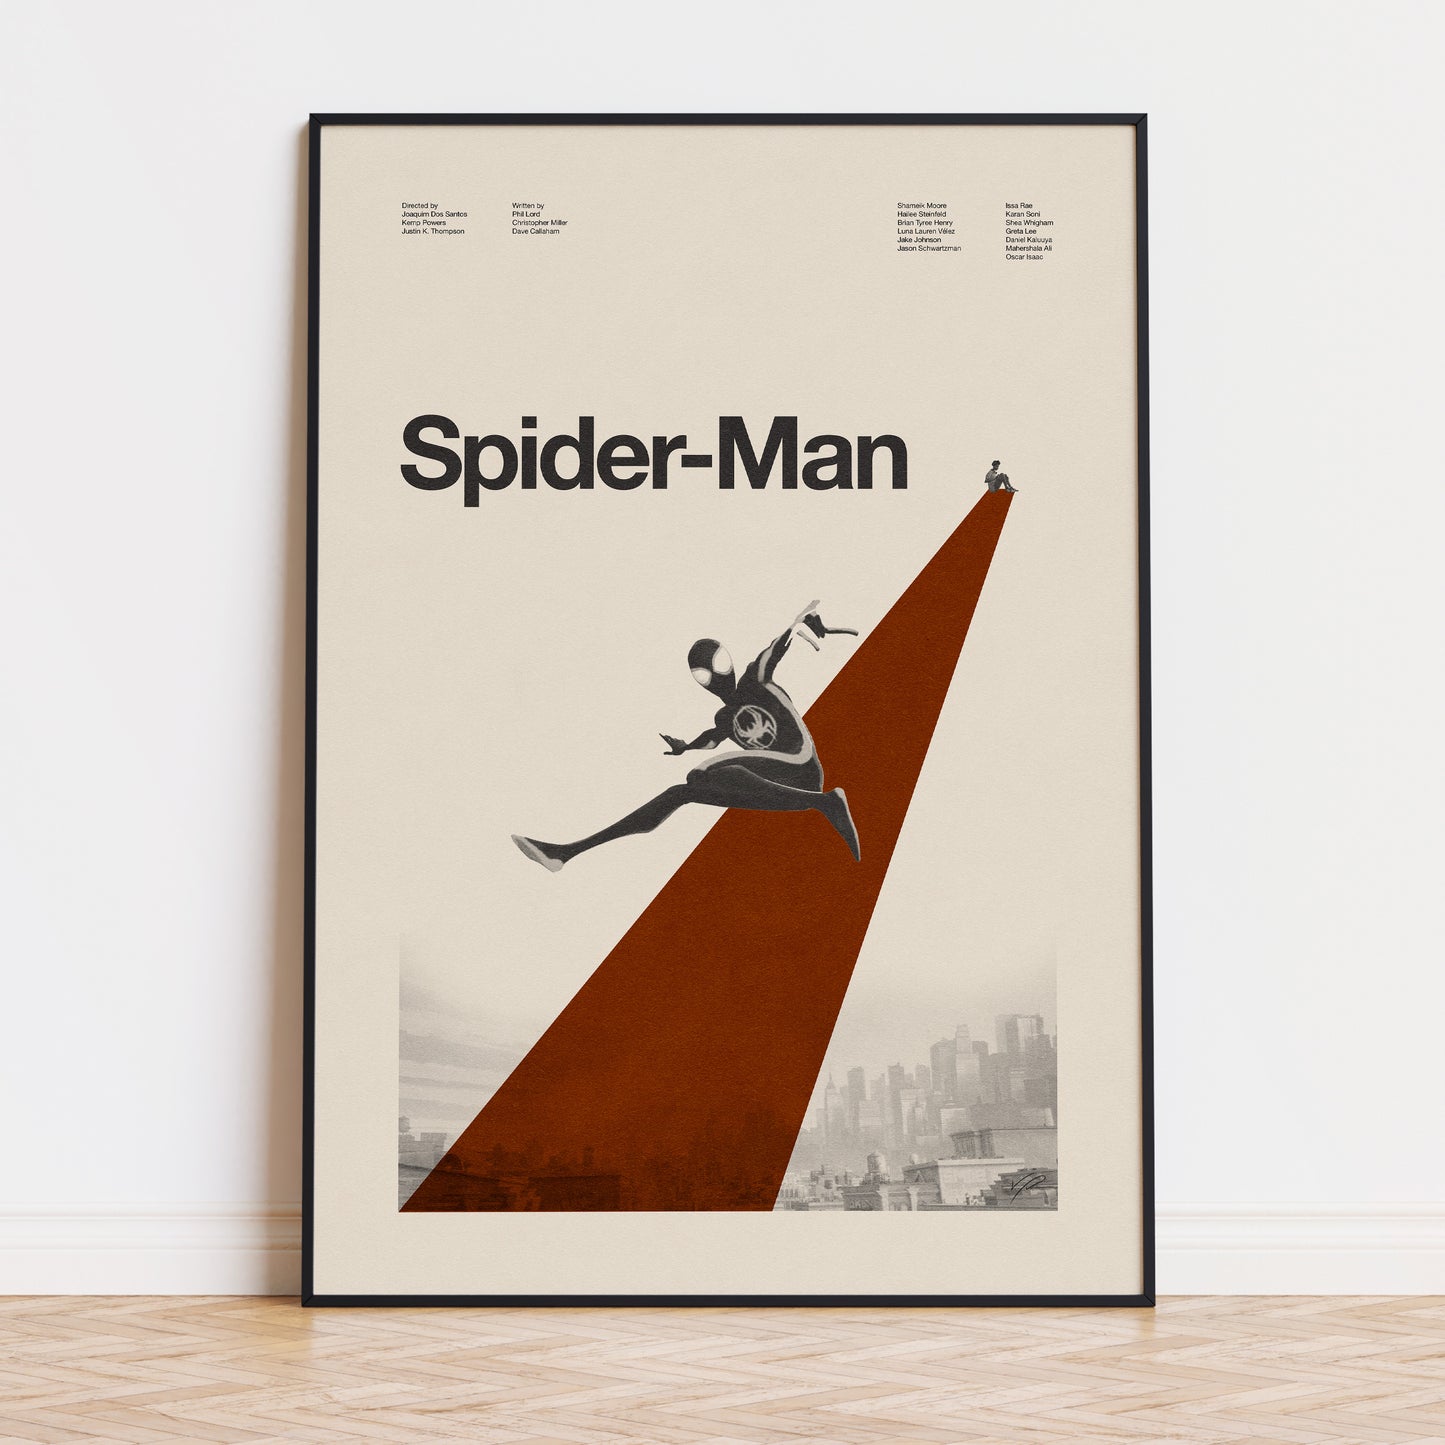 Spider man movie print art in mid century modern style red abstract shape